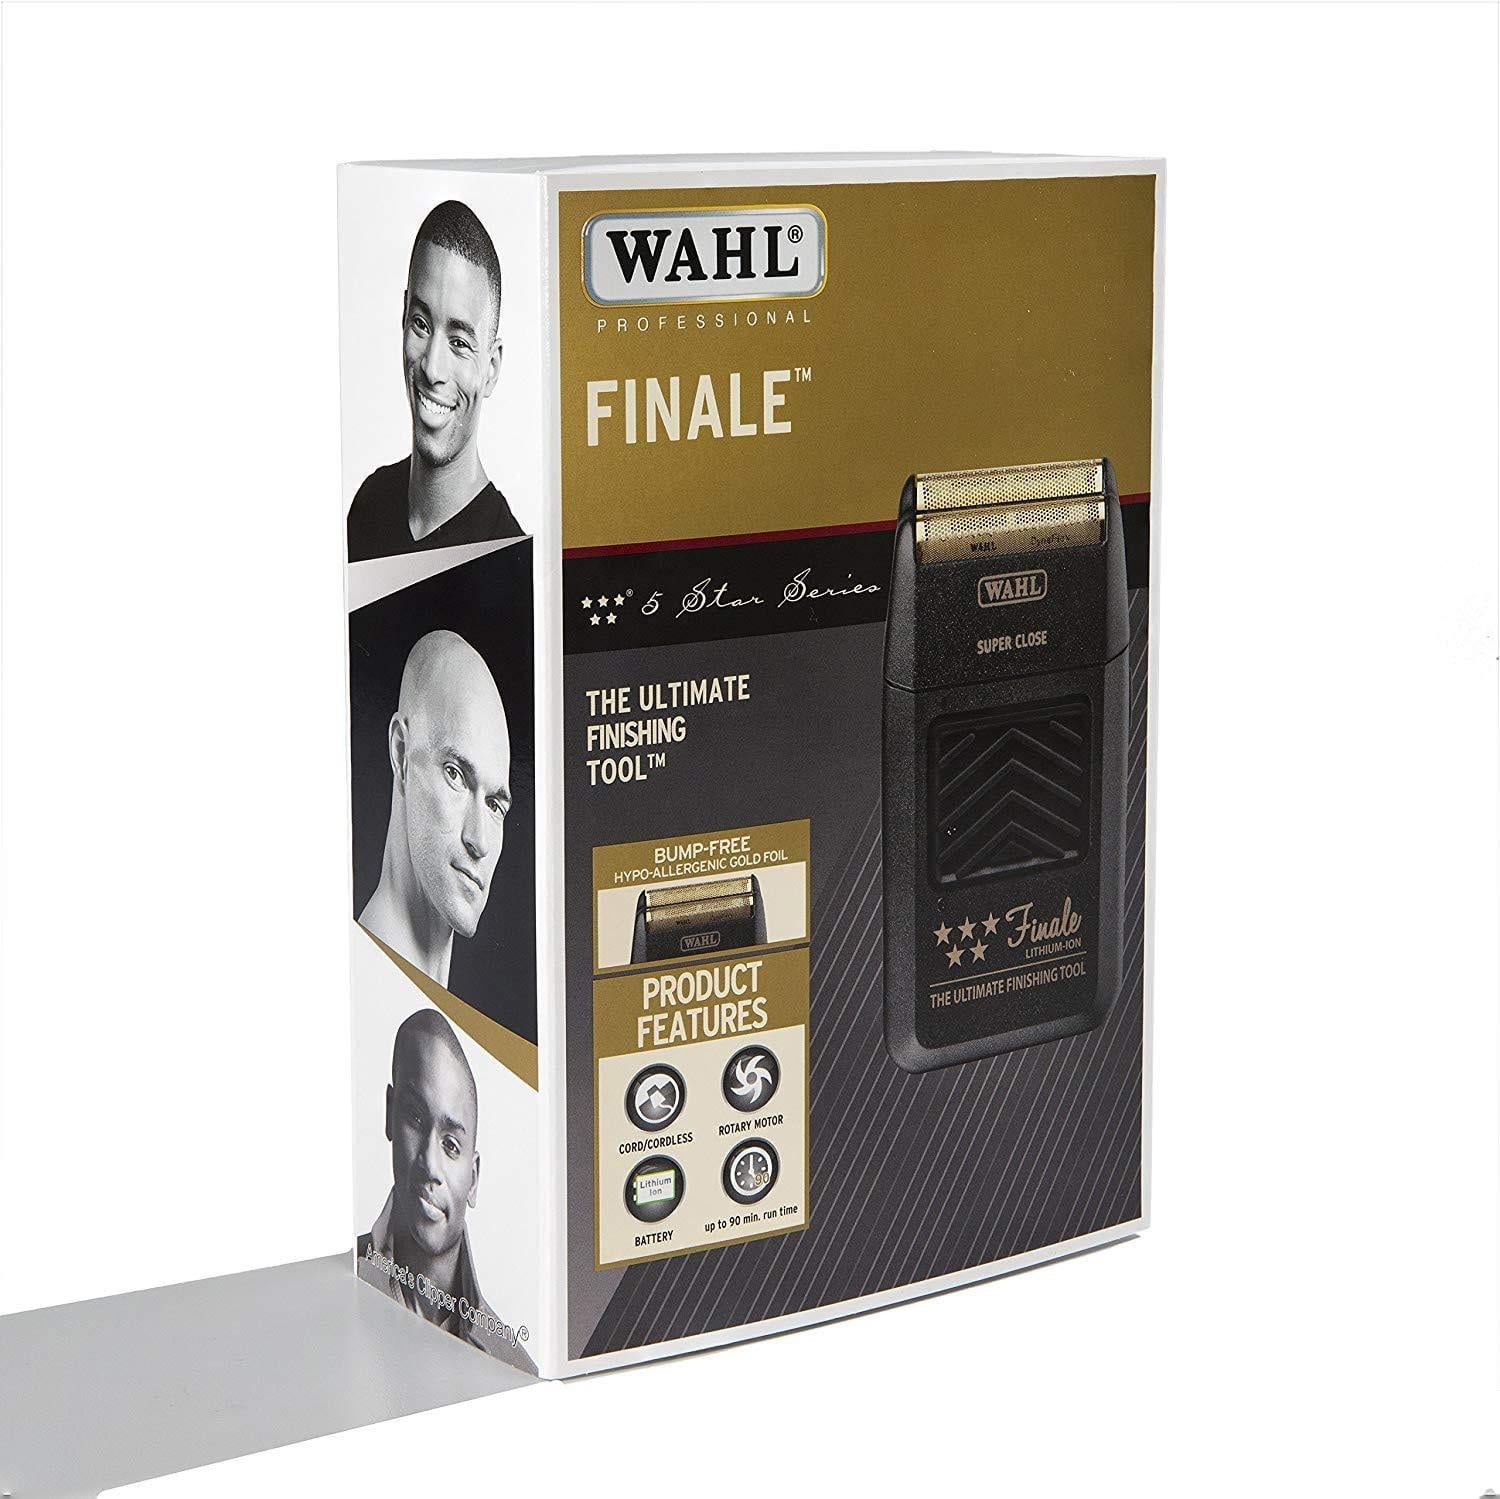 Wahl, Wahl Professional 5-Star Series Finale Finishing Tool #8164, Mk Beauty Club, Electric Shavers